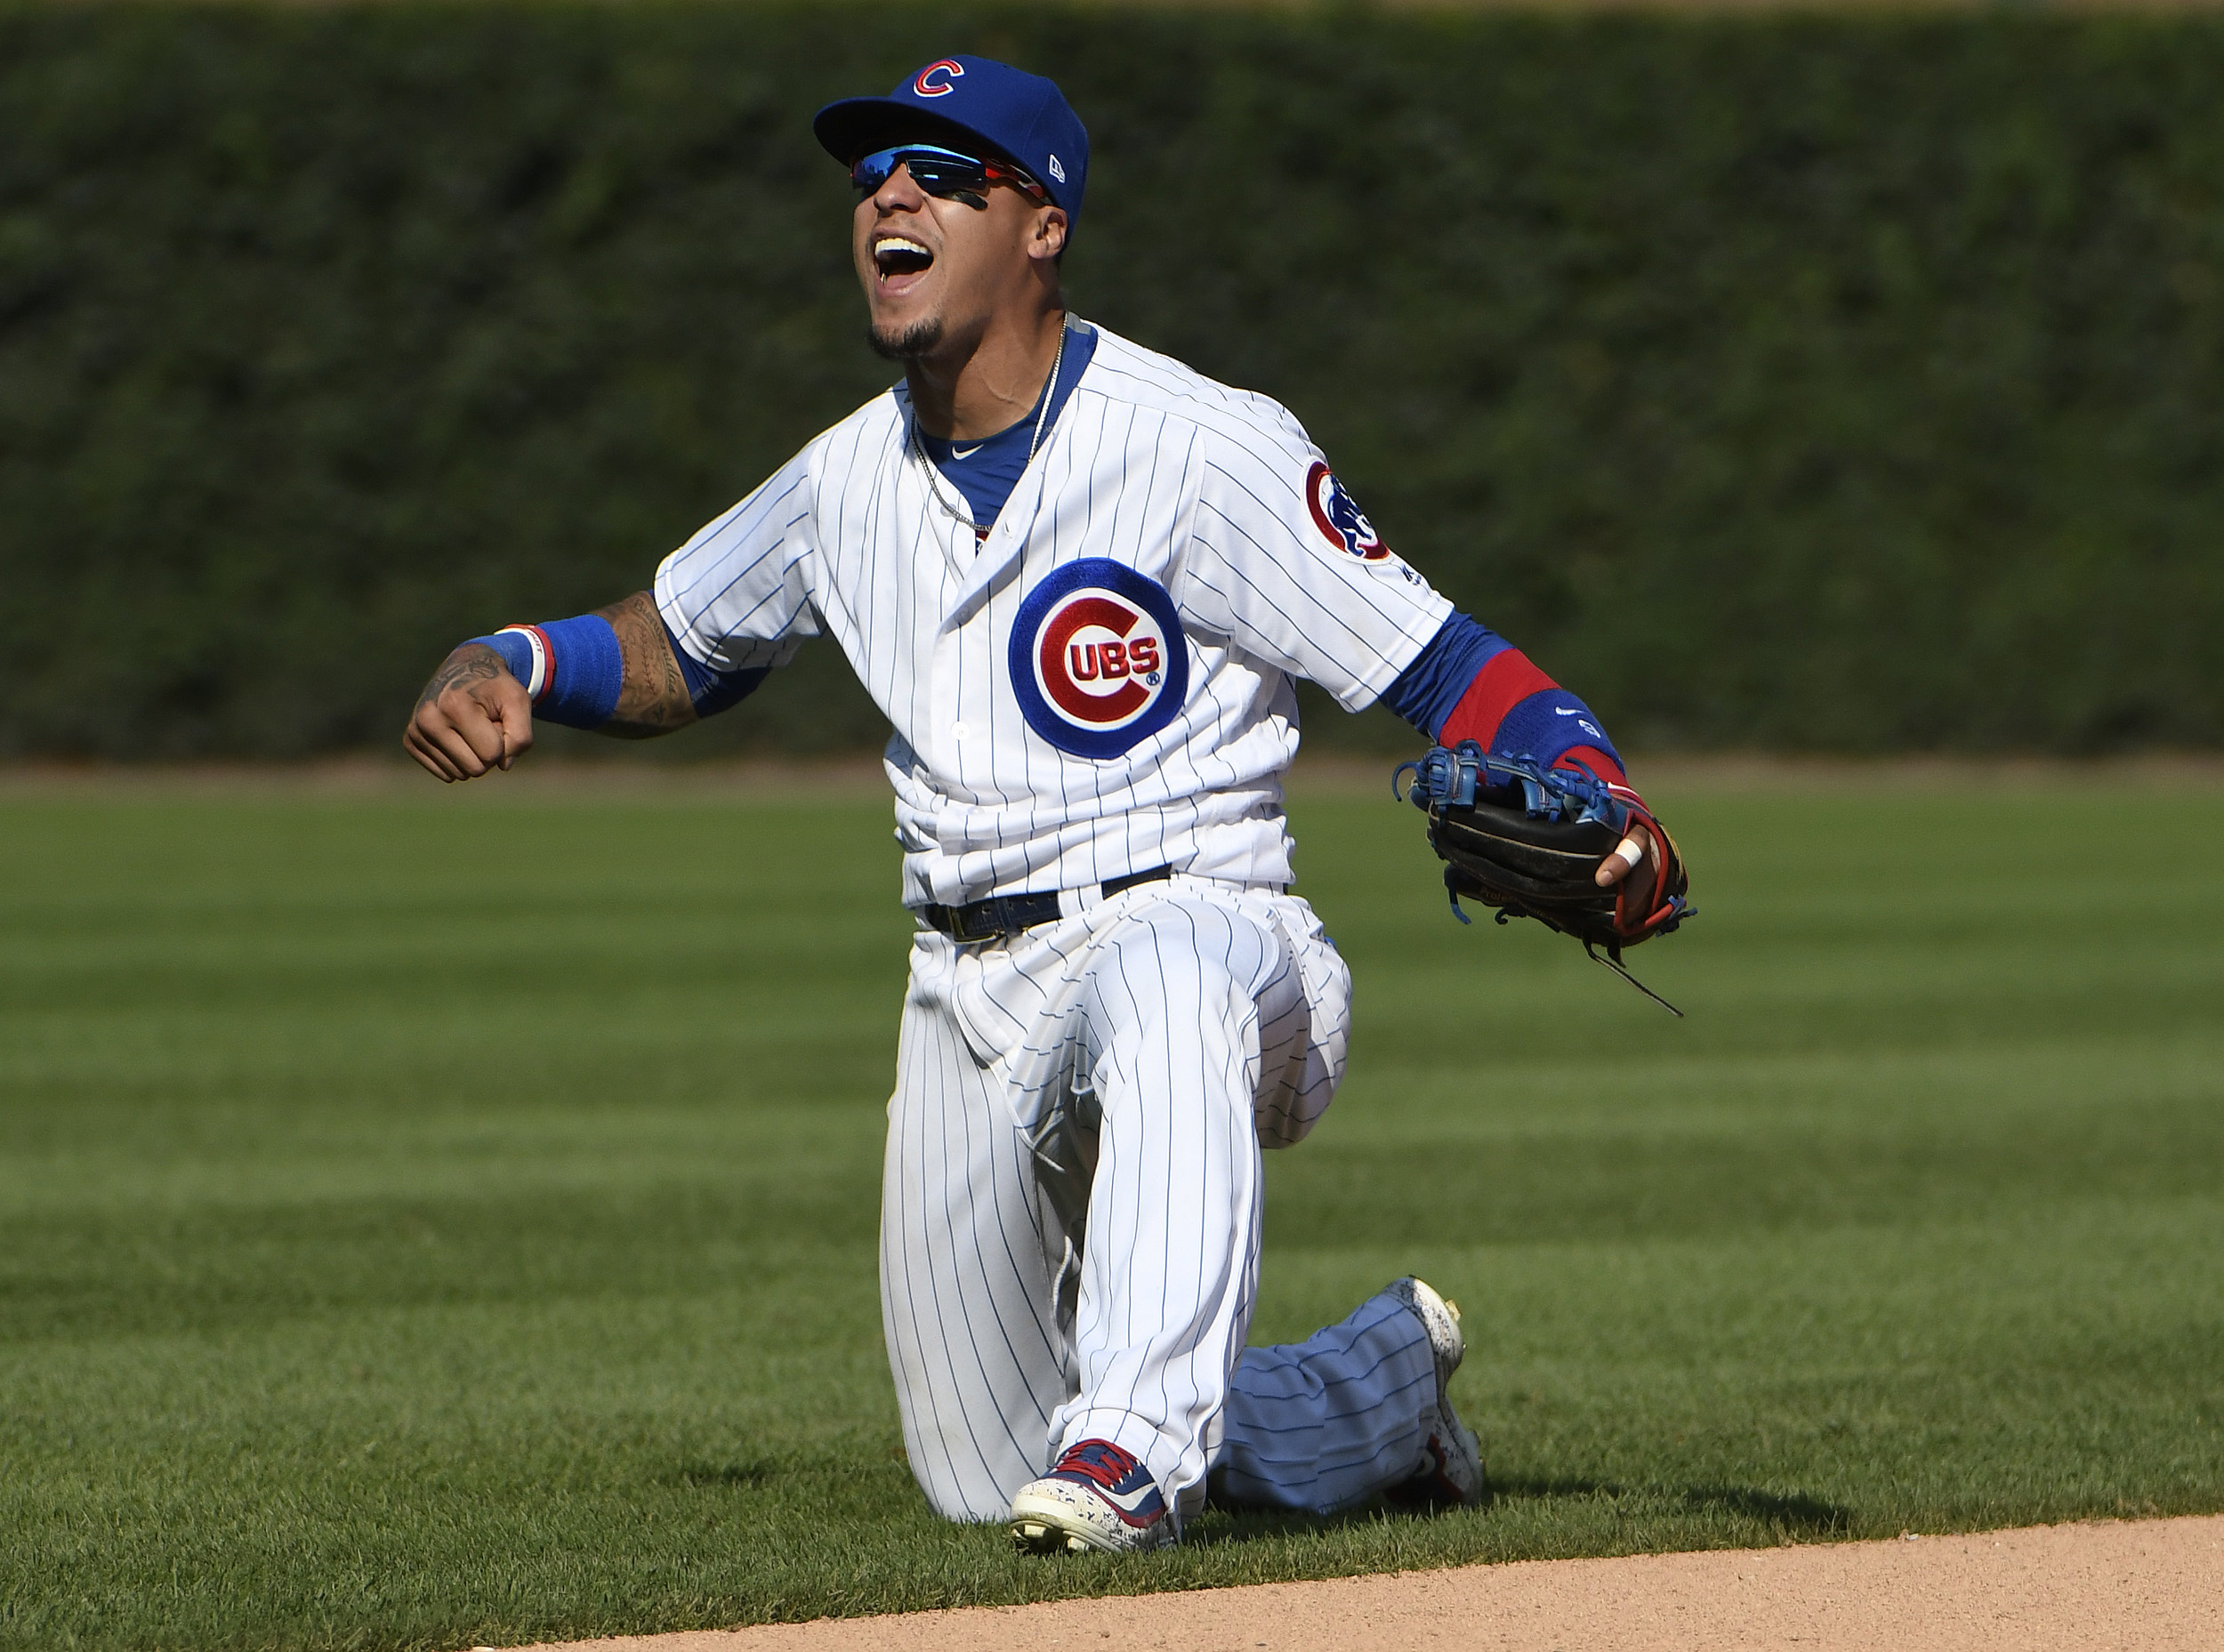 Is Javy Baez Secret To Great Playing His New Hair?